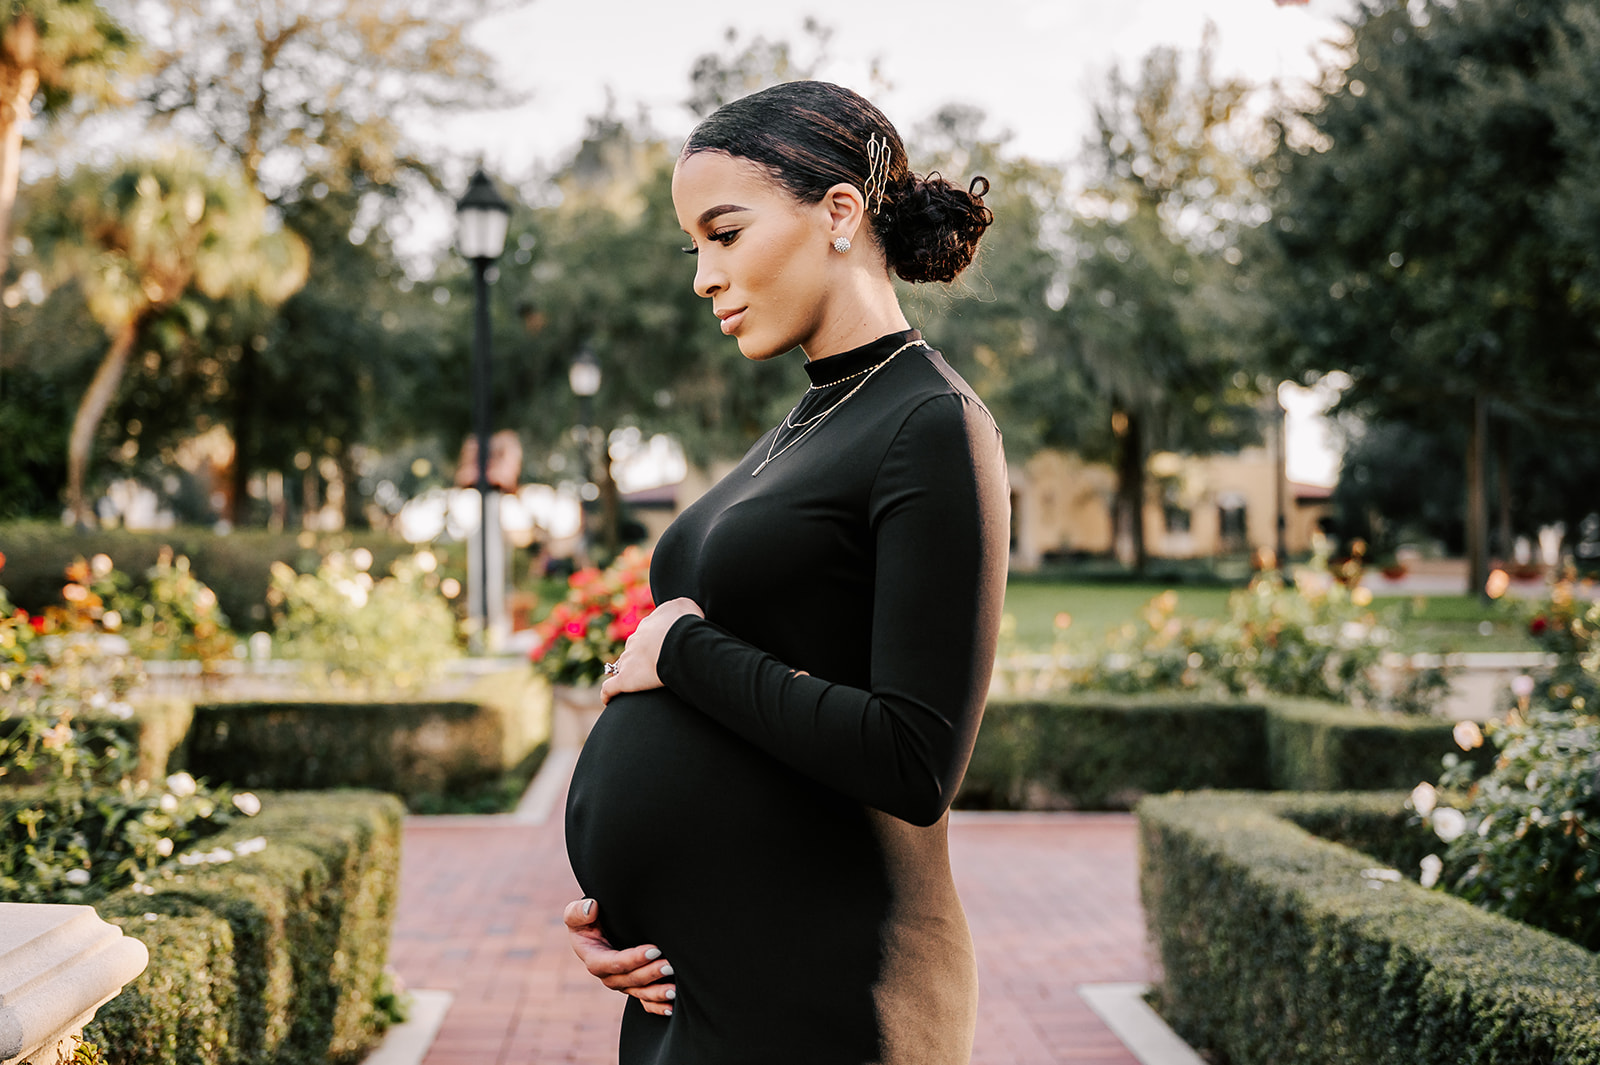 A pregnant woman stands on a brick path in a rose garden while holding the top and bottom of her bump